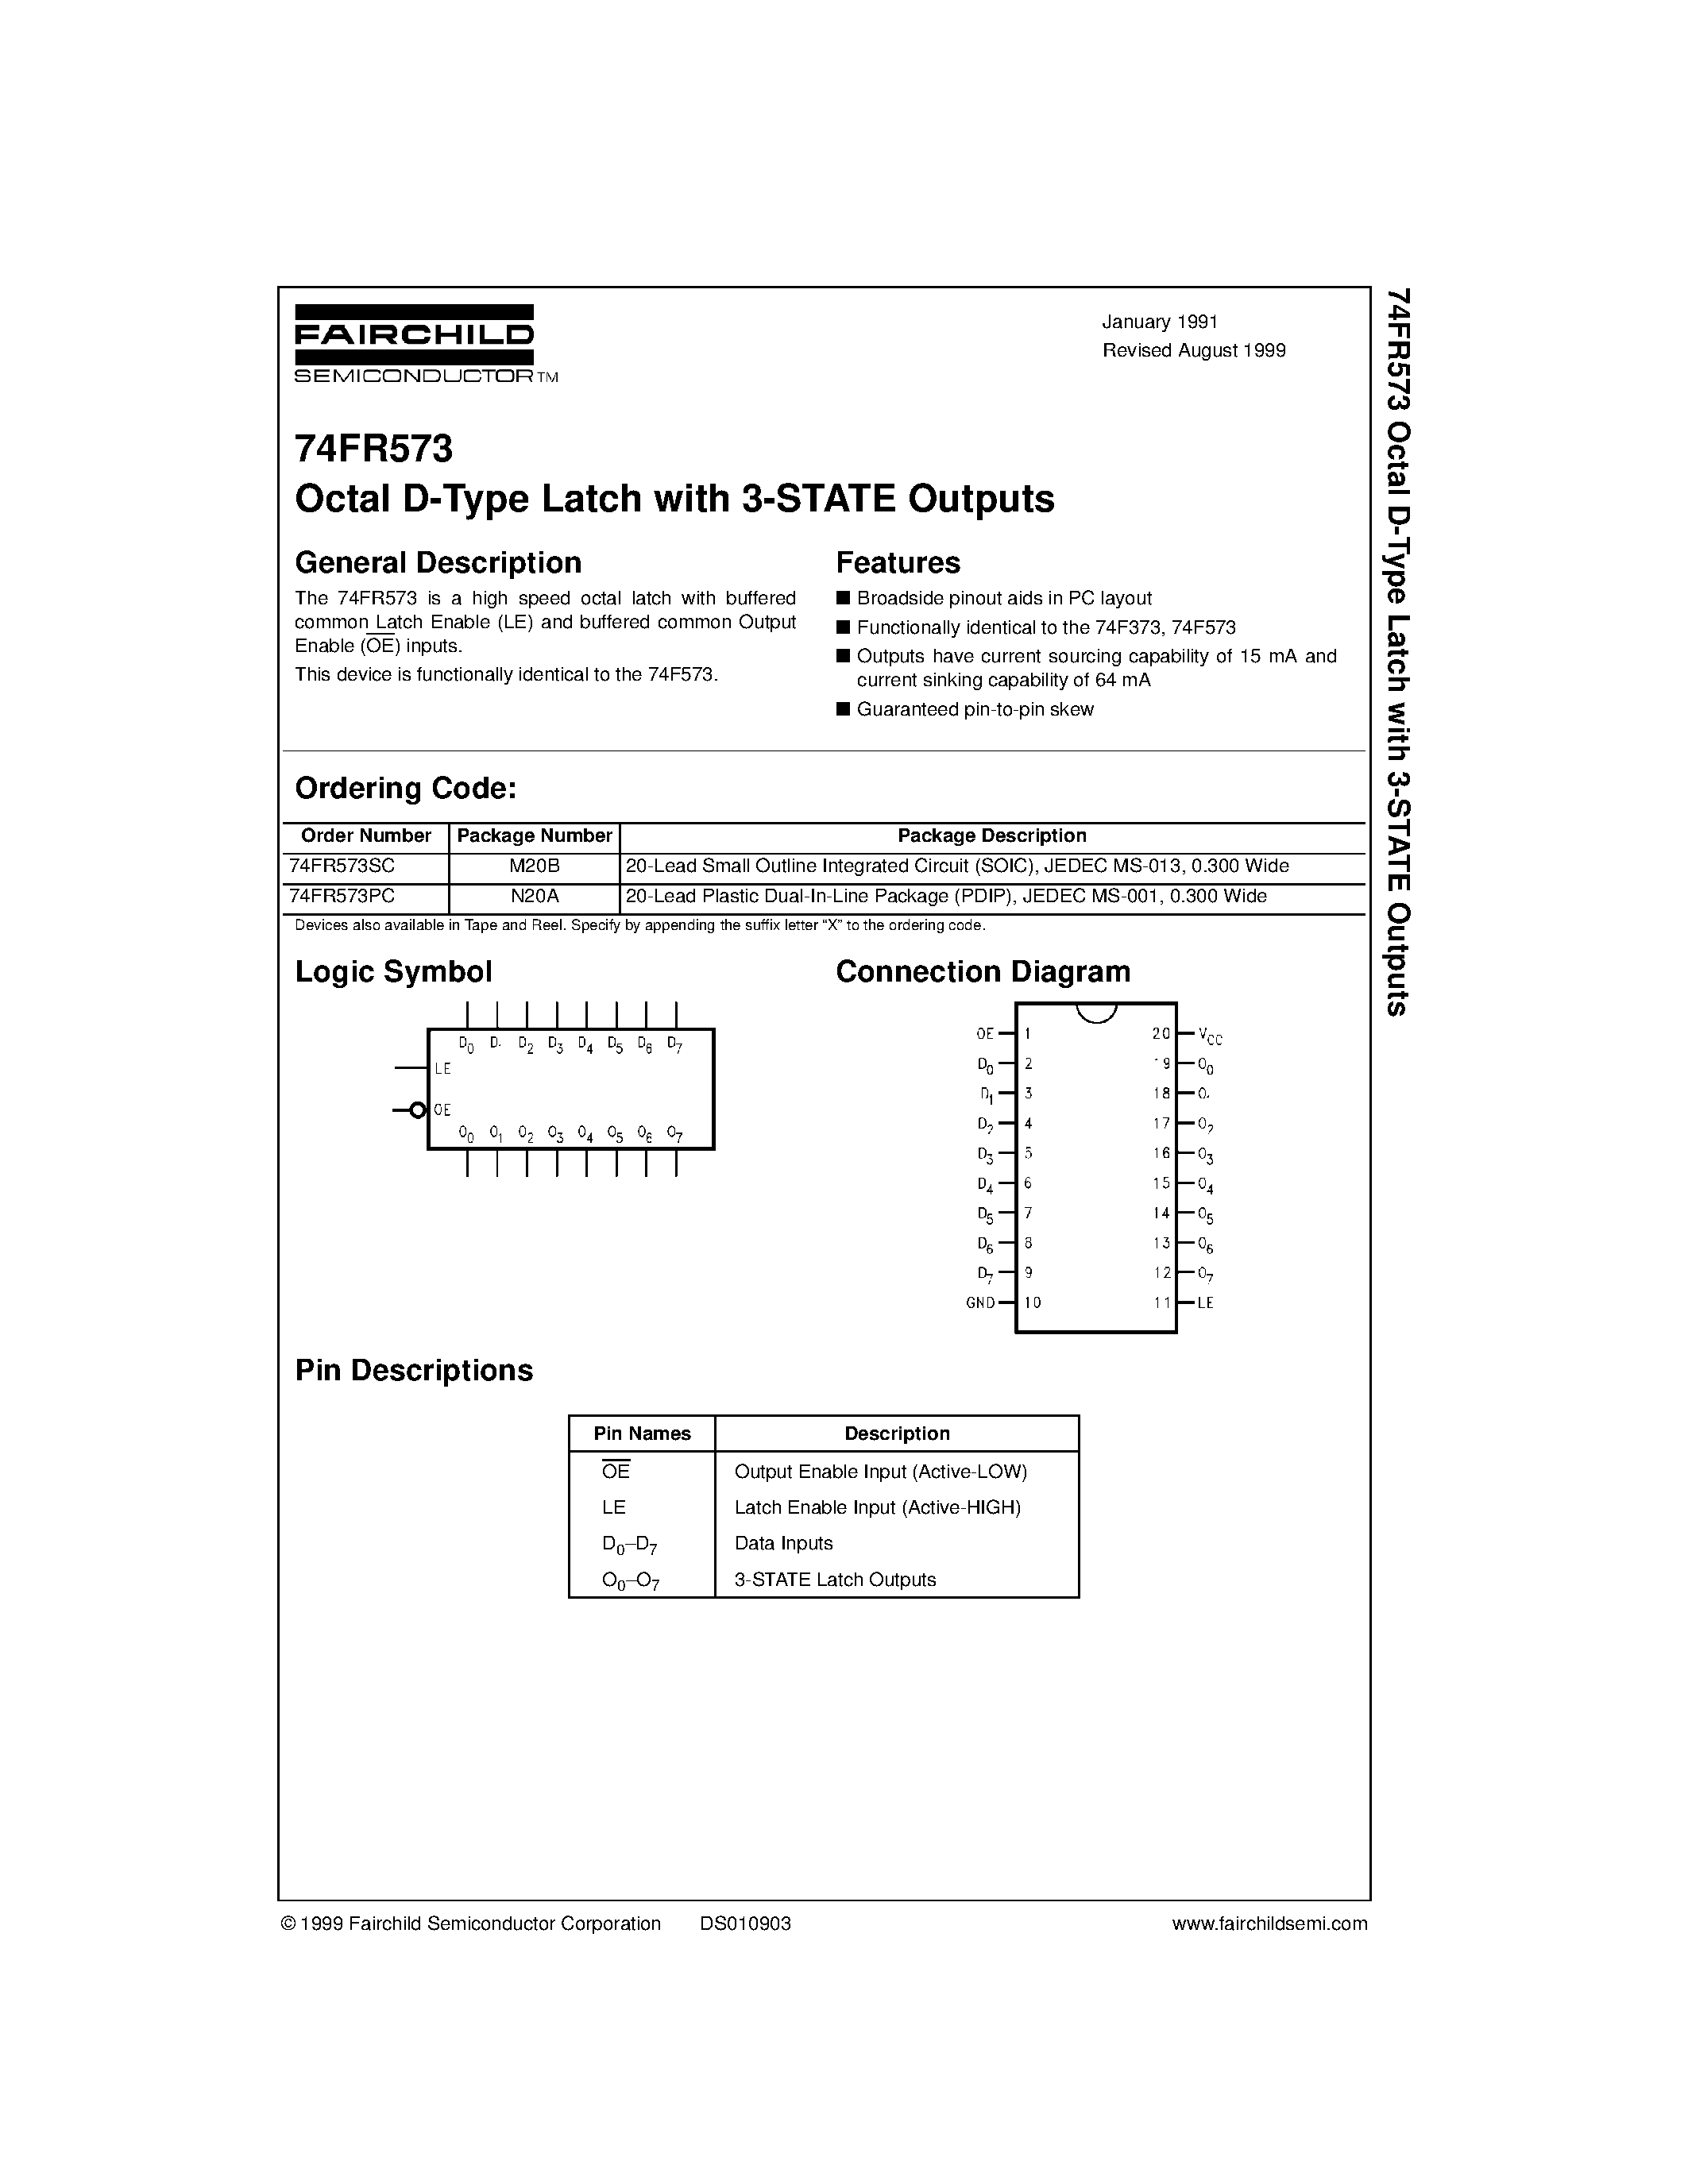 Datasheet 74FR573SC - Octal D-Type Latch with 3-STATE Outputs page 1